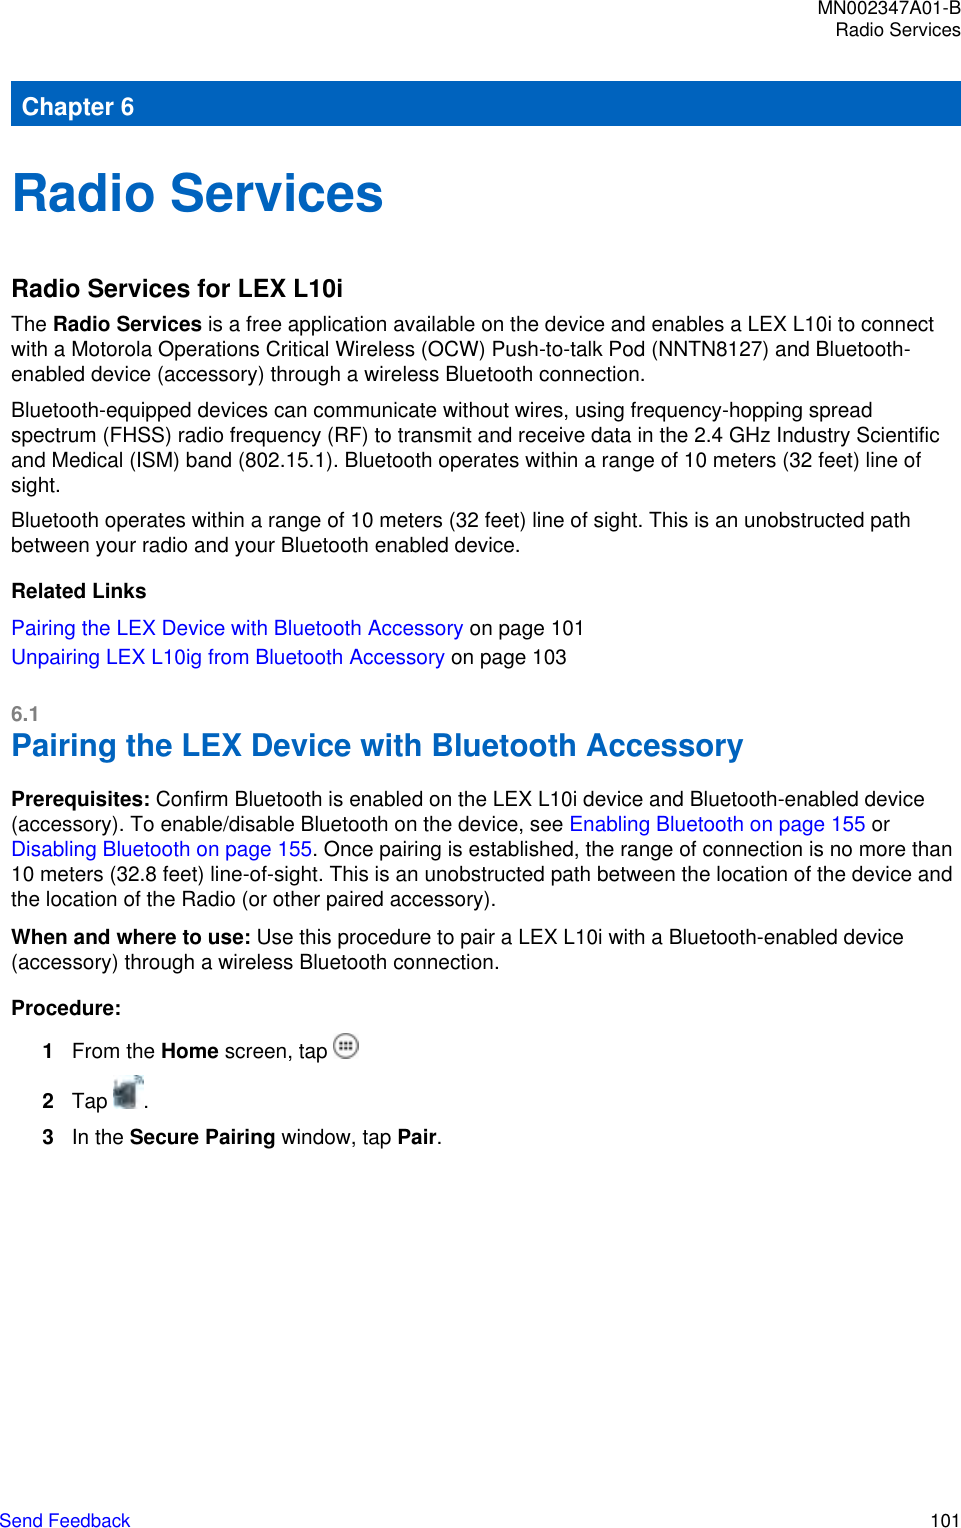 Chapter 6Radio ServicesRadio Services for LEX L10iThe Radio Services is a free application available on the device and enables a LEX L10i to connectwith a Motorola Operations Critical Wireless (OCW) Push-to-talk Pod (NNTN8127) and Bluetooth-enabled device (accessory) through a wireless Bluetooth connection.Bluetooth-equipped devices can communicate without wires, using frequency-hopping spreadspectrum (FHSS) radio frequency (RF) to transmit and receive data in the 2.4 GHz Industry Scientificand Medical (ISM) band (802.15.1). Bluetooth operates within a range of 10 meters (32 feet) line ofsight.Bluetooth operates within a range of 10 meters (32 feet) line of sight. This is an unobstructed pathbetween your radio and your Bluetooth enabled device.Related LinksPairing the LEX Device with Bluetooth Accessory on page 101Unpairing LEX L10ig from Bluetooth Accessory on page 1036.1Pairing the LEX Device with Bluetooth AccessoryPrerequisites: Confirm Bluetooth is enabled on the LEX L10i device and Bluetooth-enabled device(accessory). To enable/disable Bluetooth on the device, see Enabling Bluetooth on page 155 or Disabling Bluetooth on page 155. Once pairing is established, the range of connection is no more than10 meters (32.8 feet) line-of-sight. This is an unobstructed path between the location of the device andthe location of the Radio (or other paired accessory).When and where to use: Use this procedure to pair a LEX L10i with a Bluetooth-enabled device(accessory) through a wireless Bluetooth connection.Procedure:1From the Home screen, tap 2Tap  .3In the Secure Pairing window, tap Pair.MN002347A01-BRadio ServicesSend Feedback   101